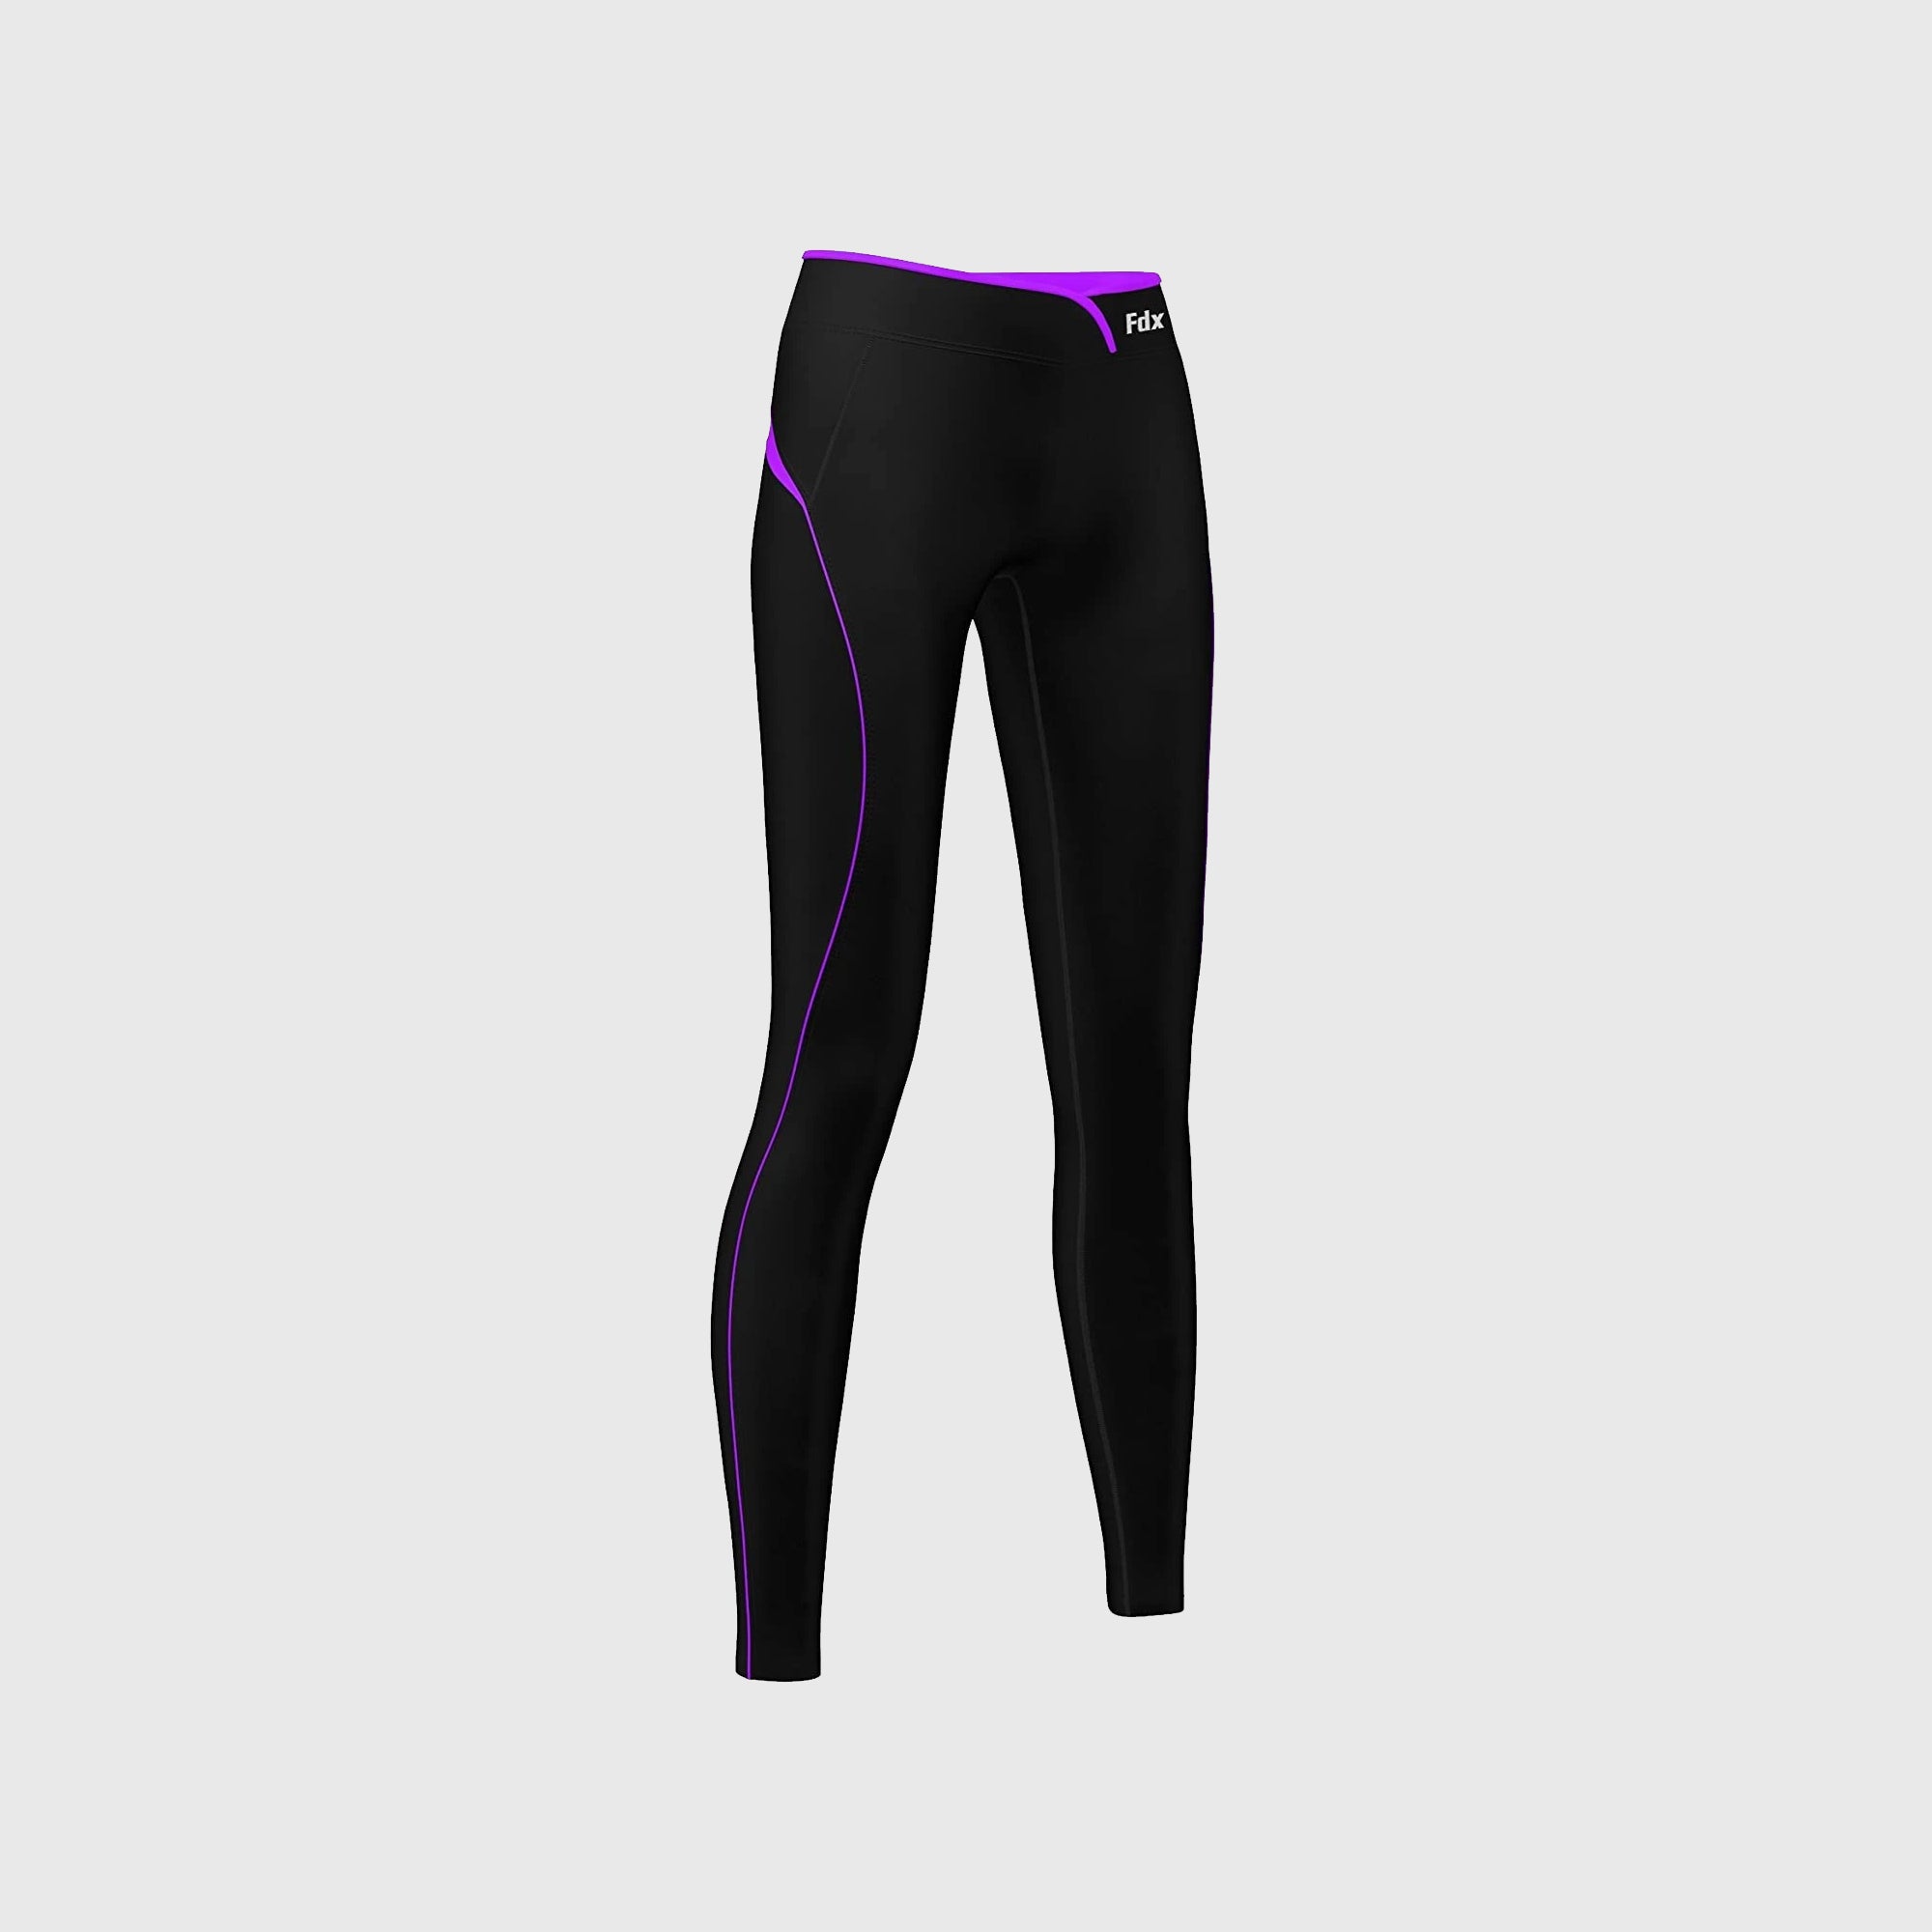 Fdx Black & Purple Compression Tights Leggings Gym Workout Running Athletic Yoga Elastic Waistband Stretchable Breathable Training Jogging Pants - P2